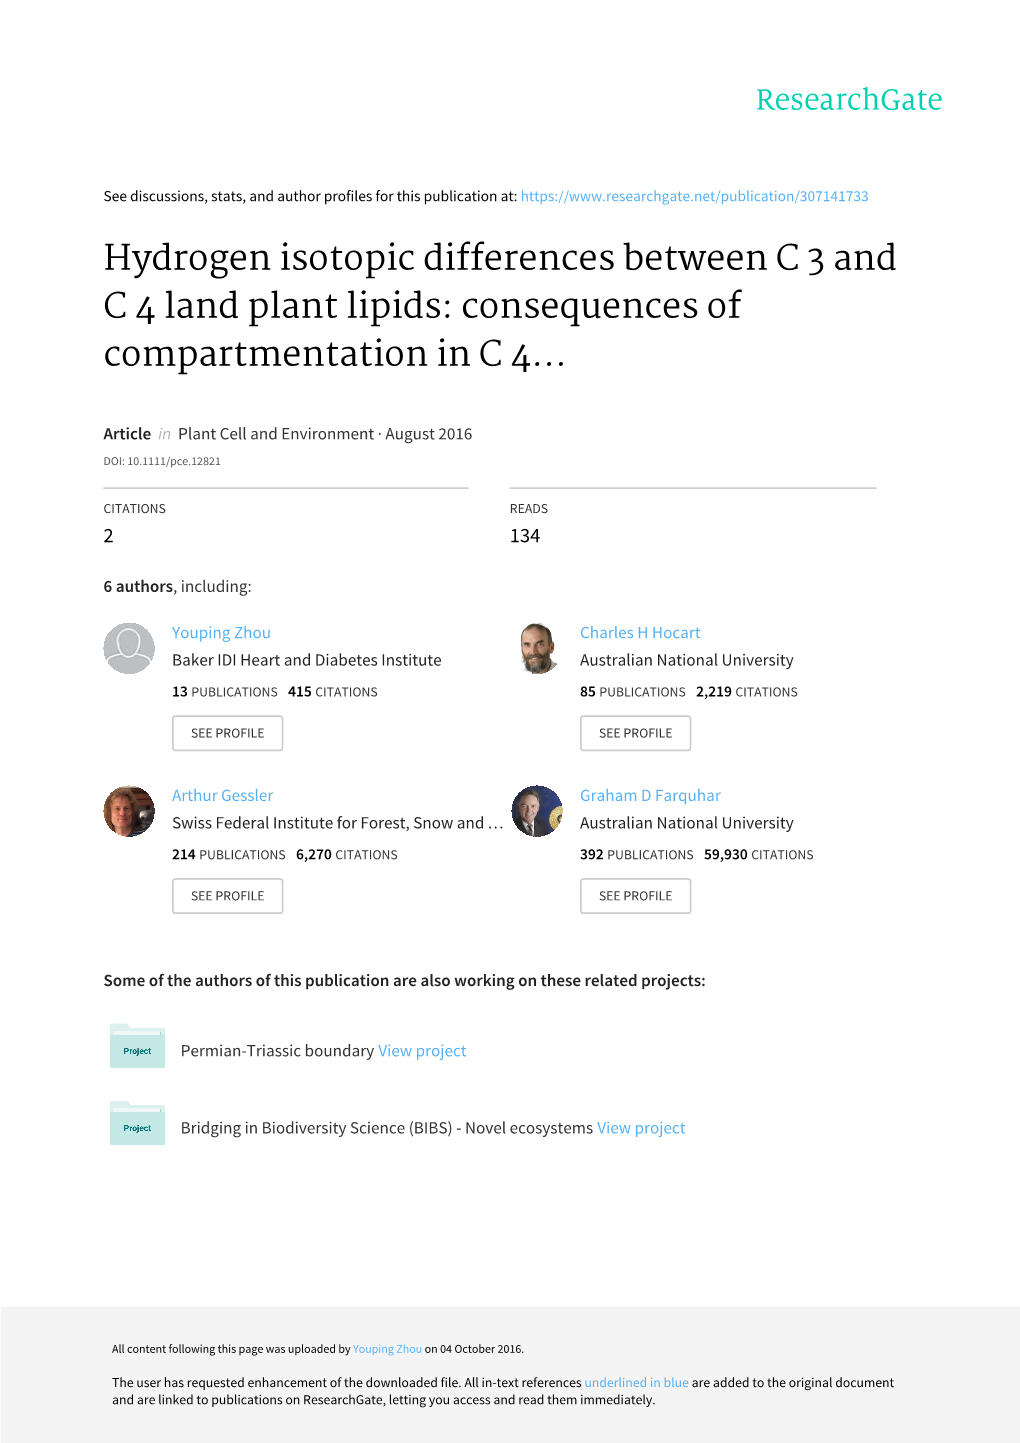 Hydrogen Isotopic Differences Between C3 and C4 Land Plant Lipids: Consequences of Compartmentation in C4 Photosynthetic Chemistry and C3 Photorespiration